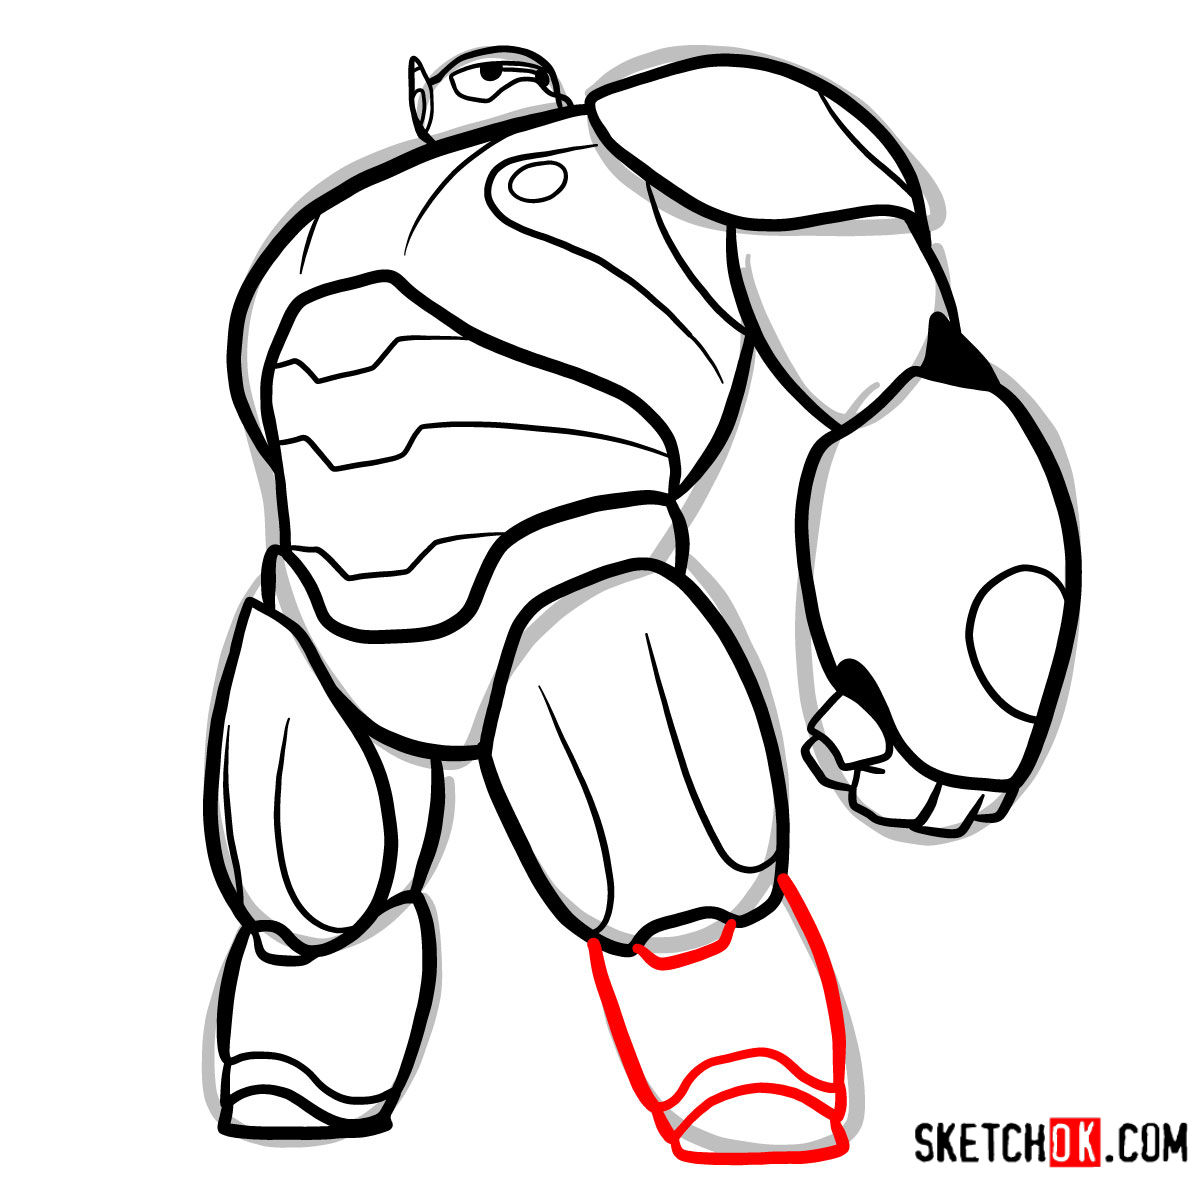 How to draw Baymax in his red armored suit - step 10